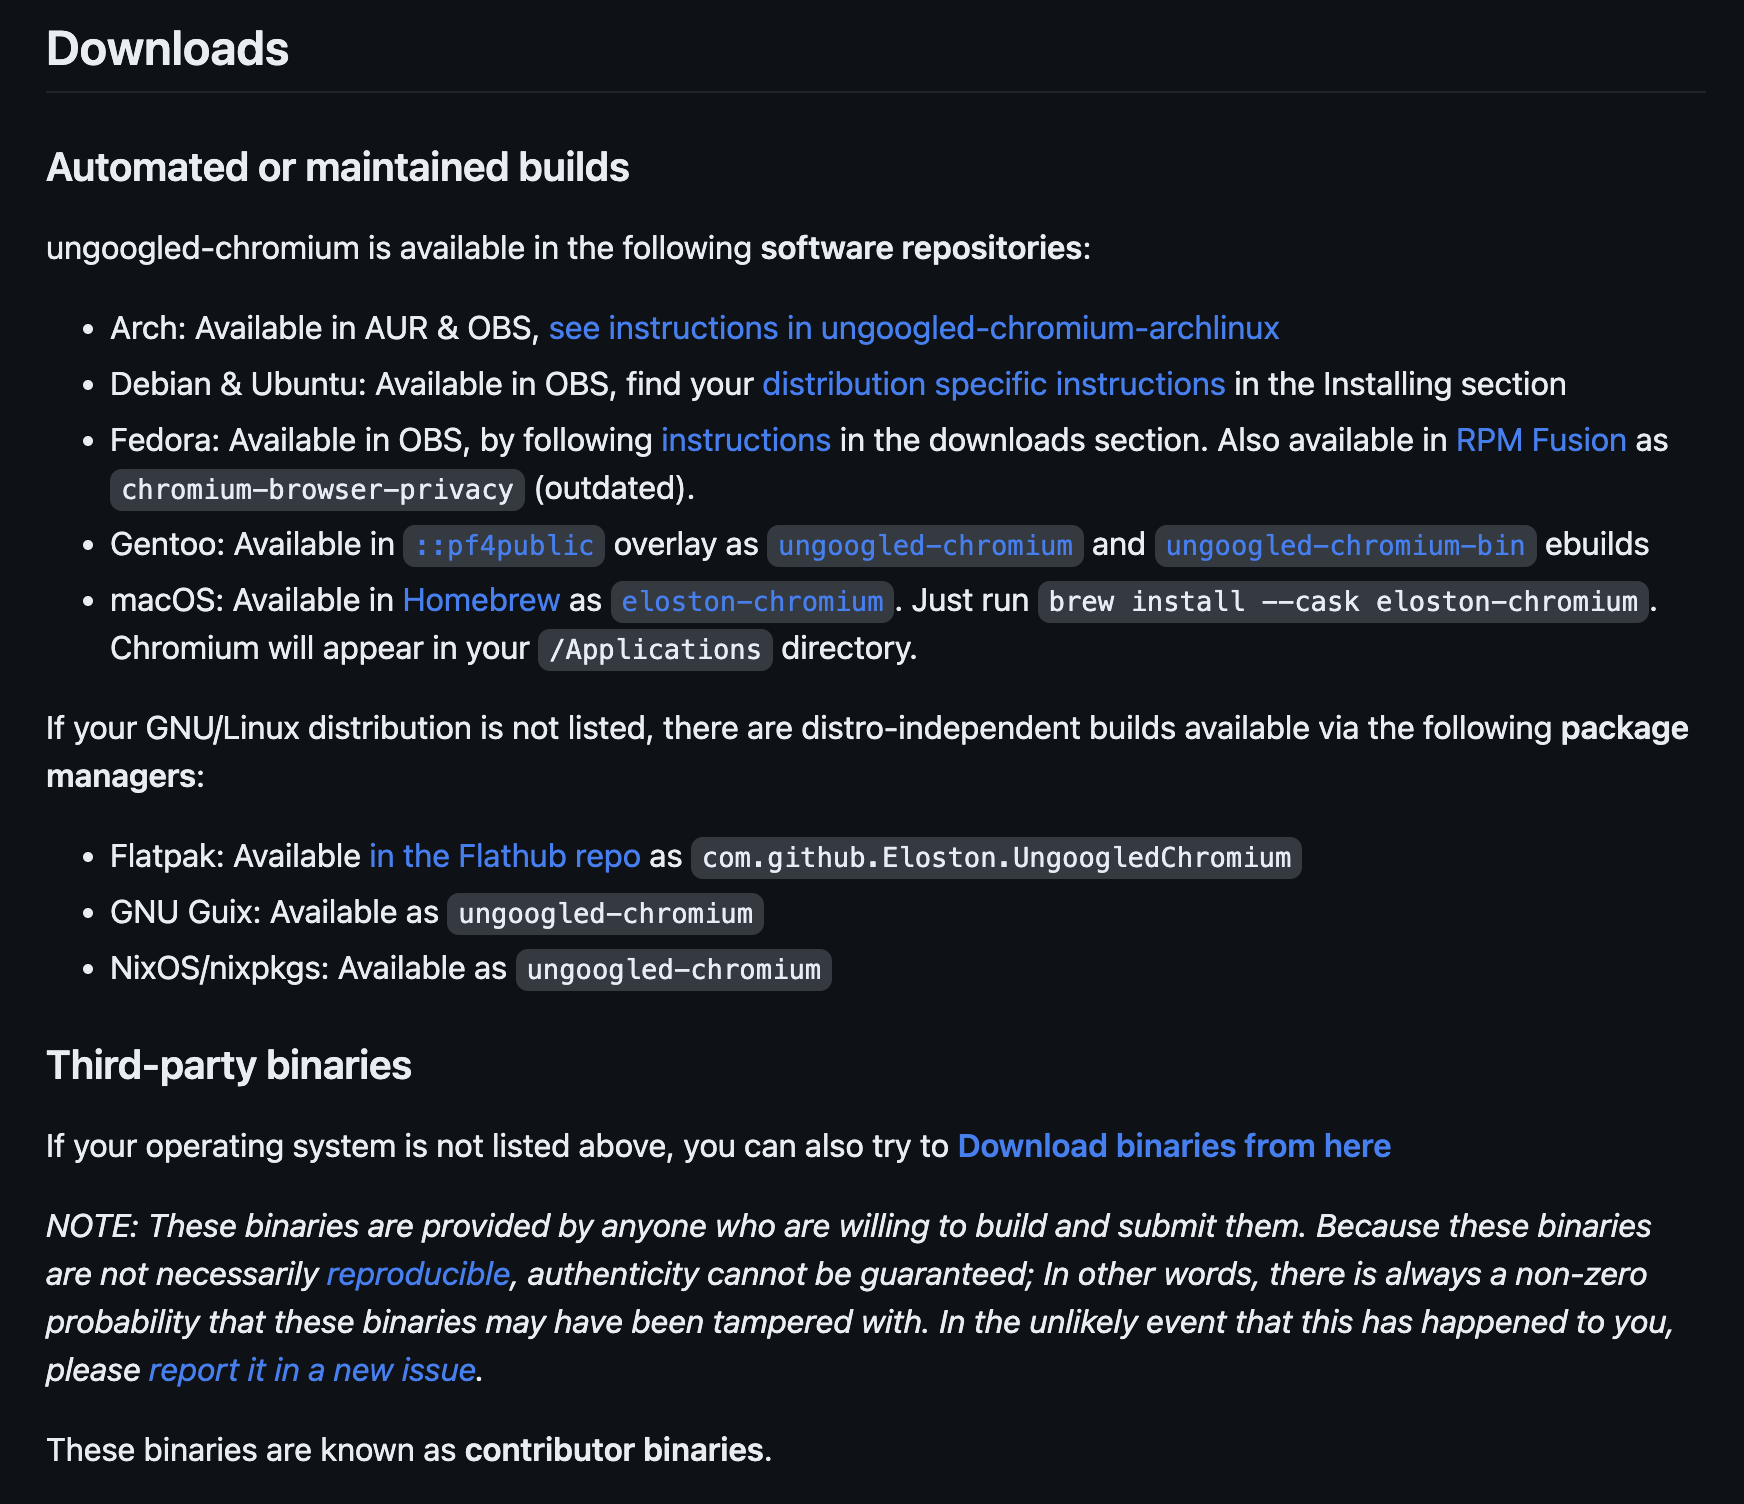 Screenshot of the "Downloads" section of the GitHub readme